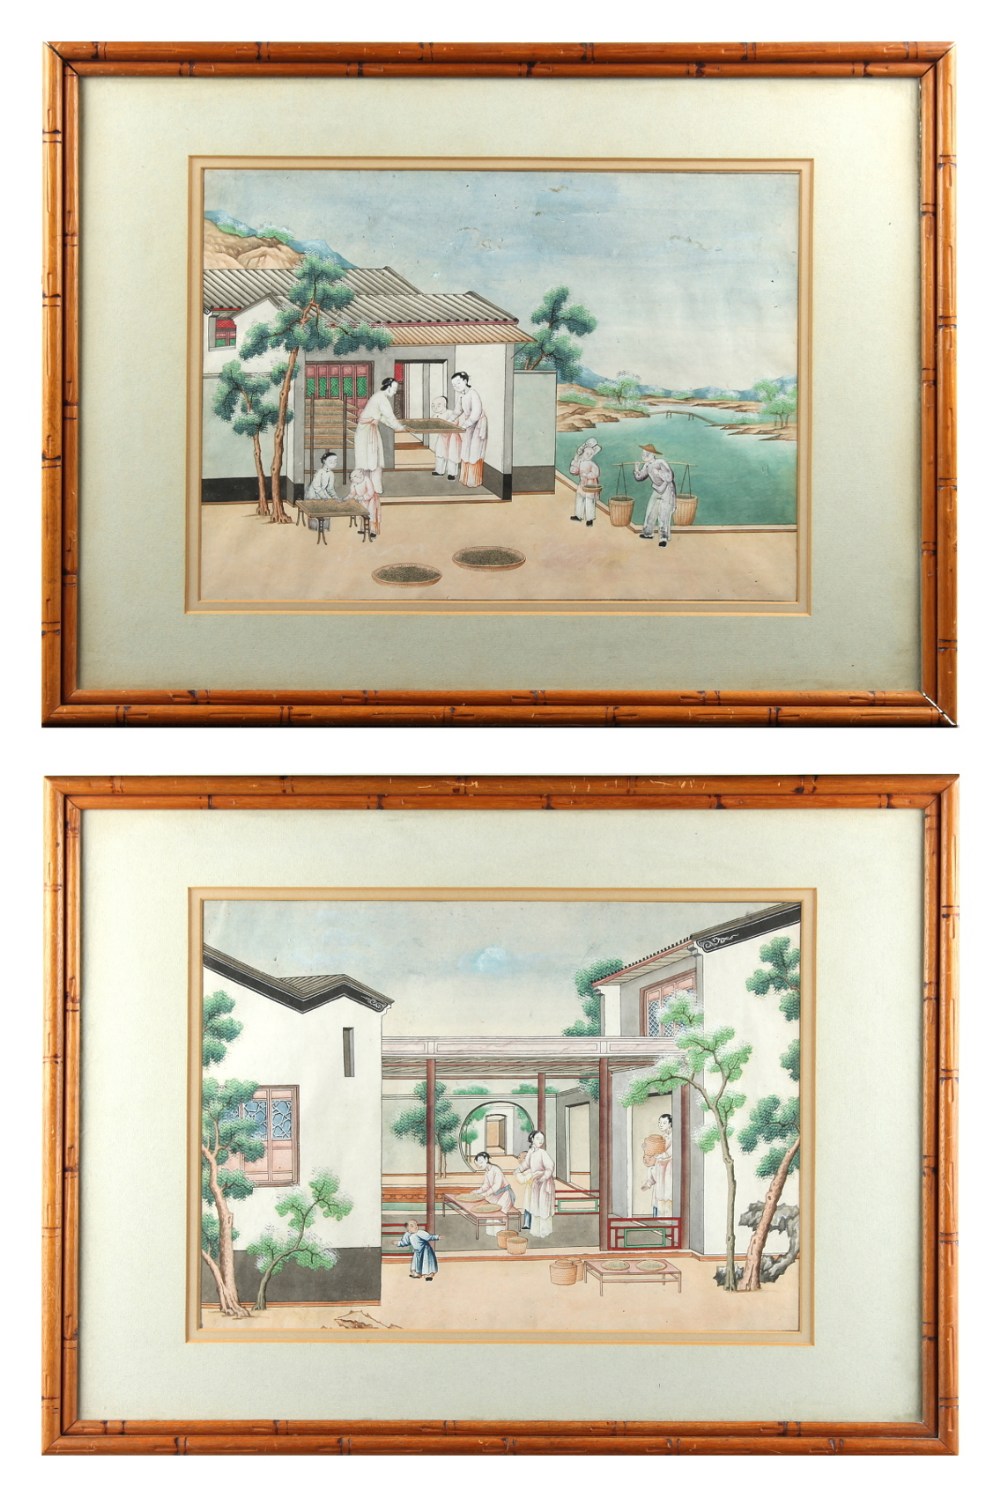 A pair of 19th century Chinese paintings on paper depicting tea production scenes, each painting